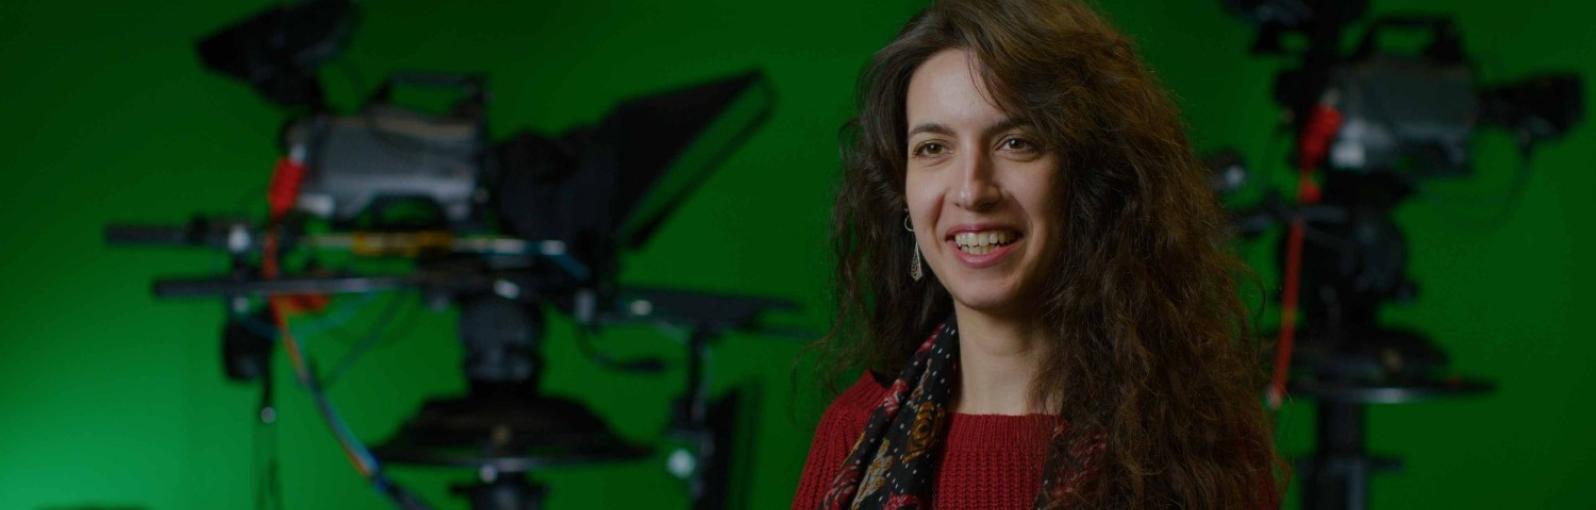 A female student sits in a green screen studio in front of two cameras.